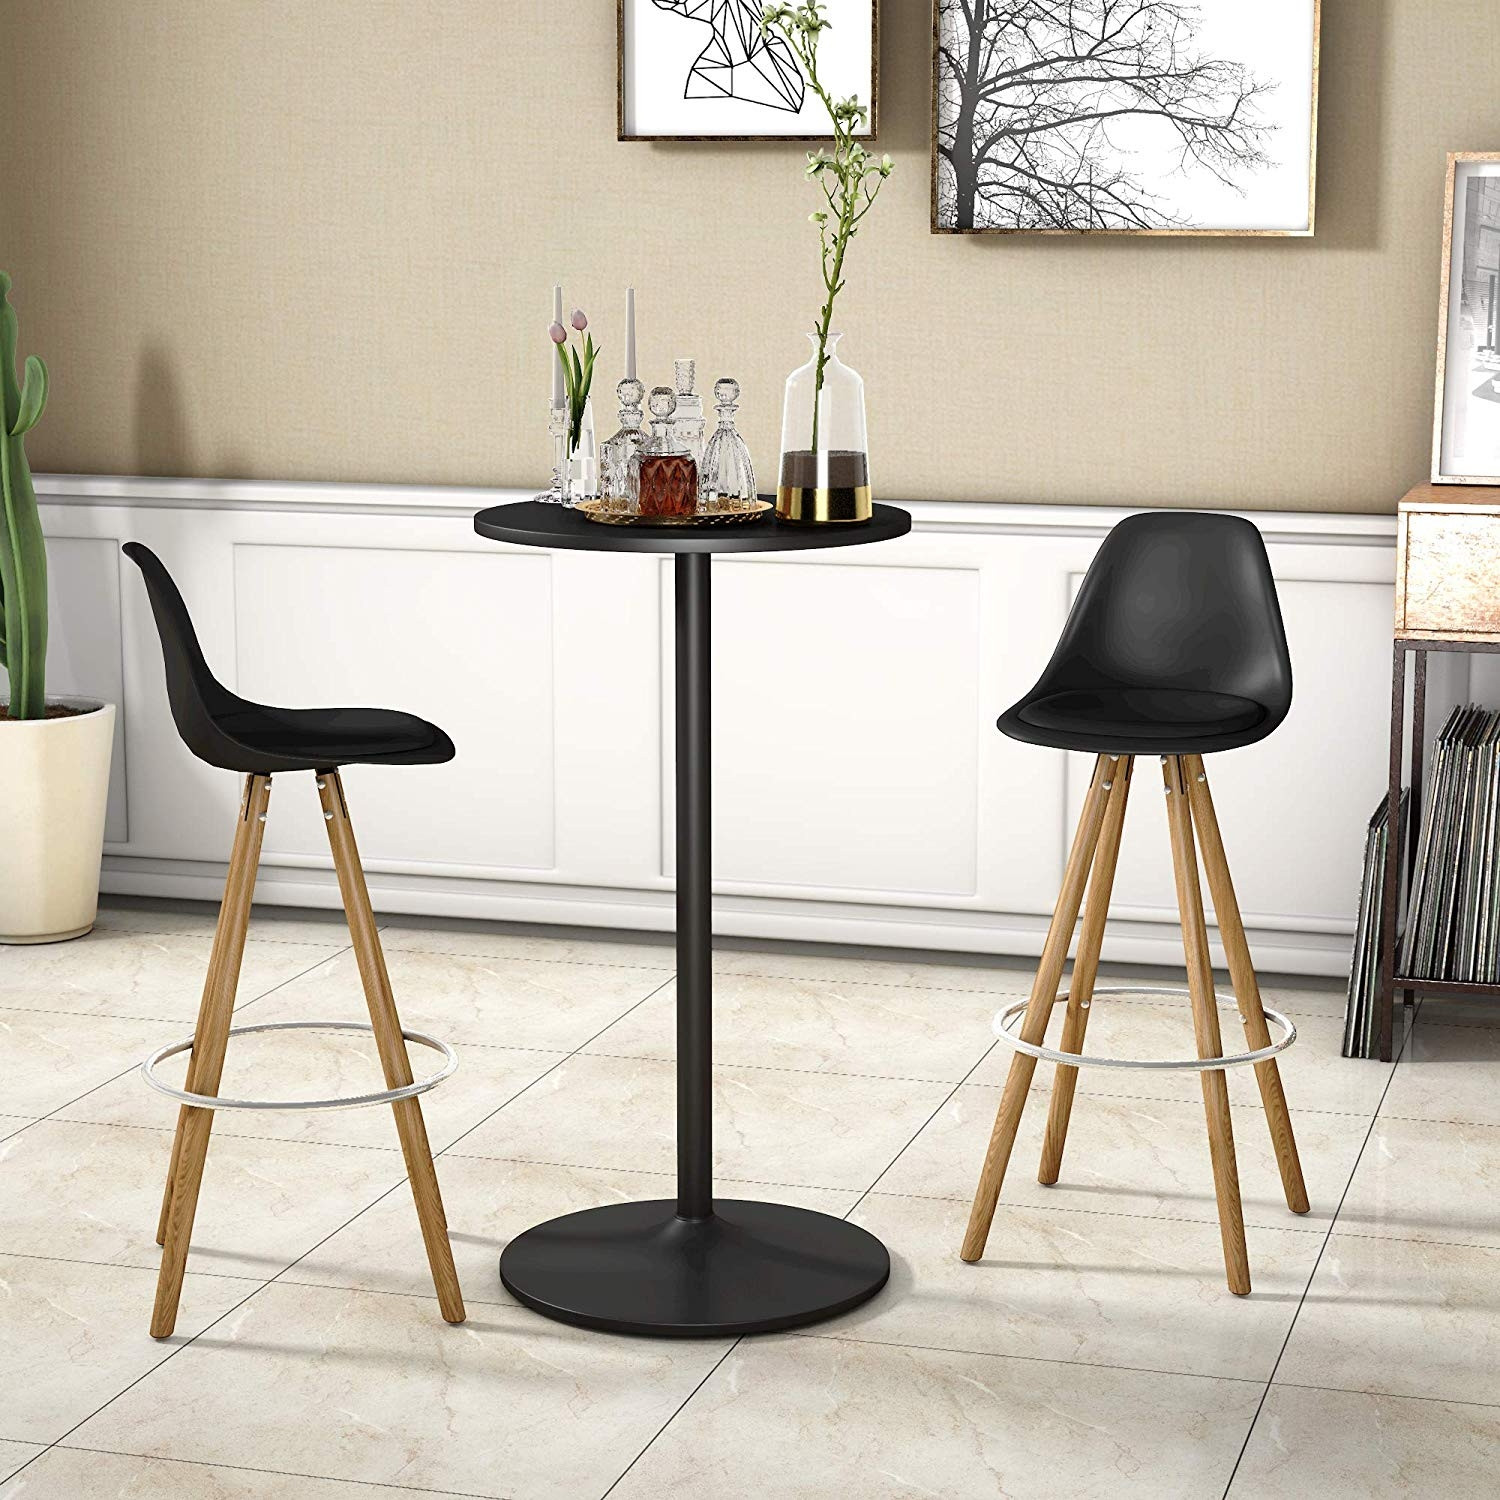 24 In. Round Pub Dining Bar Table